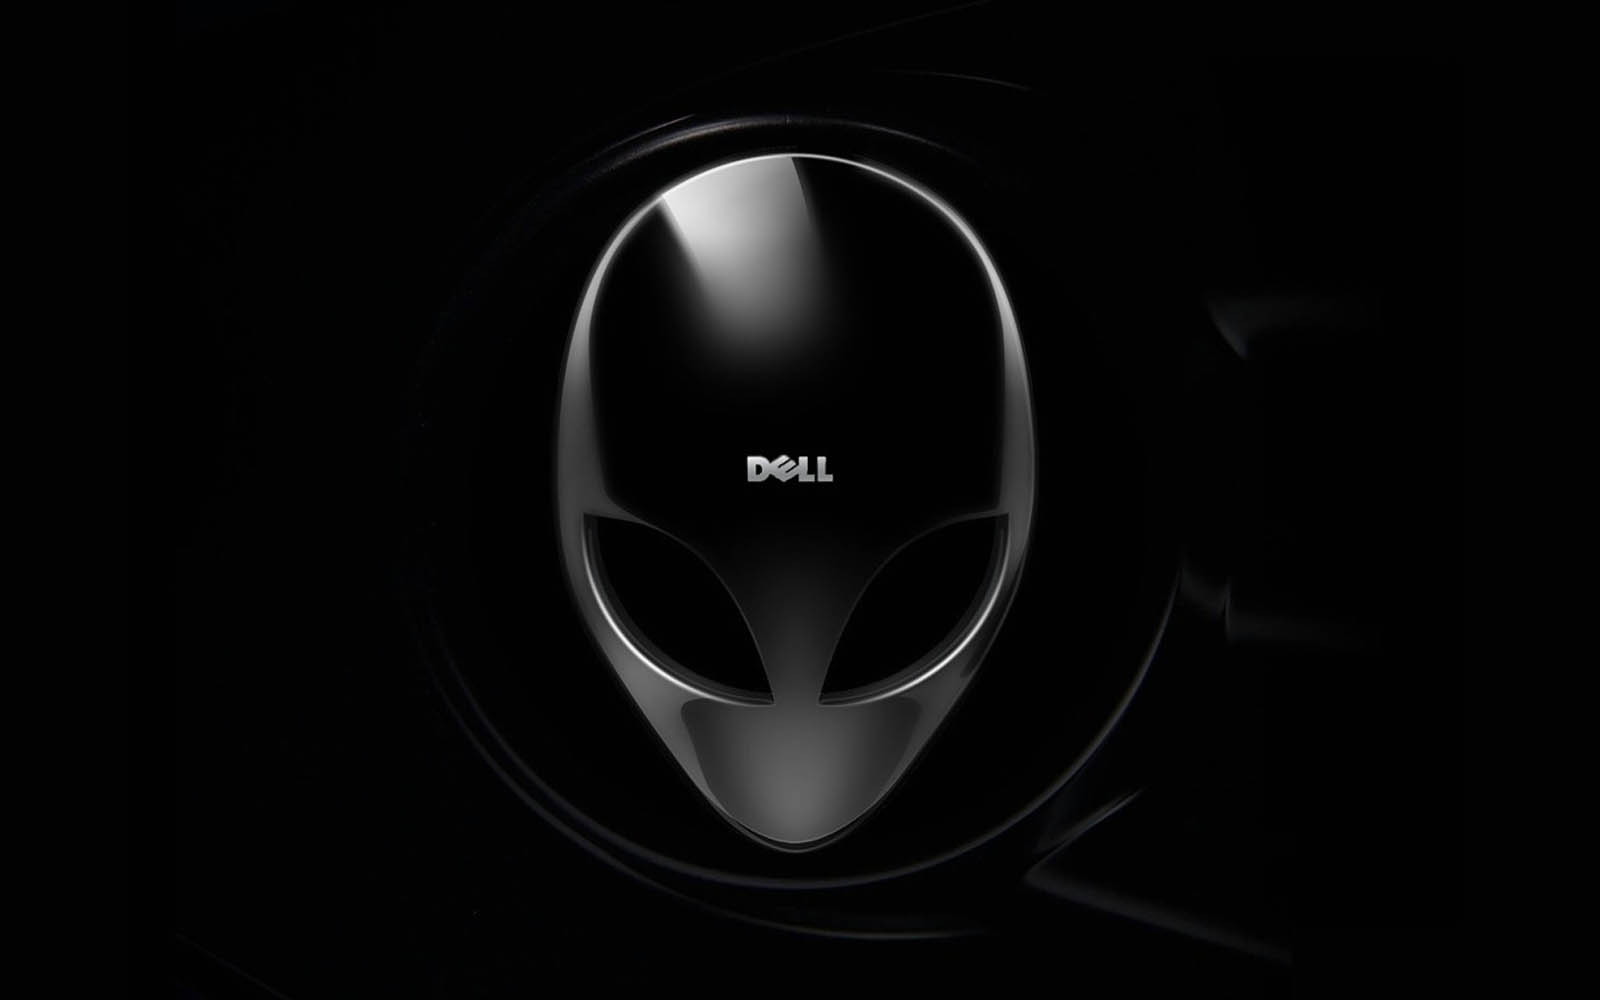 Tag Dell Wallpaper Image Paos Pictures And Background For